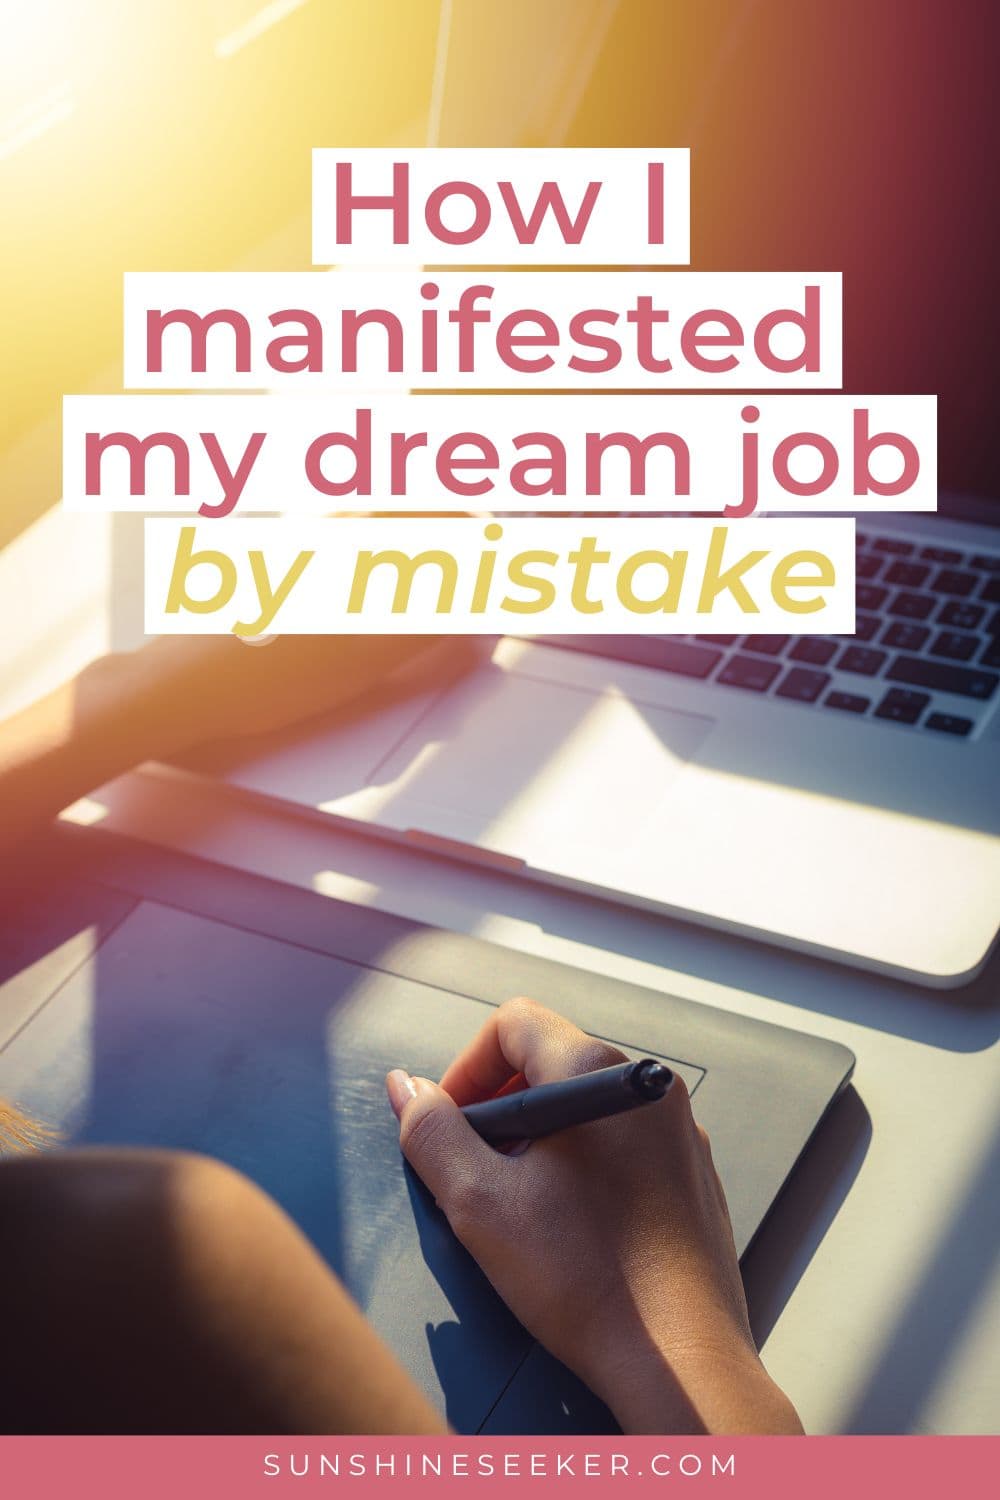 Learn how I manifested my dream job by mistake. Get my step-by-step manifestation process, what I should have done differently and how I manifested my dream car next. This can literally change your life!